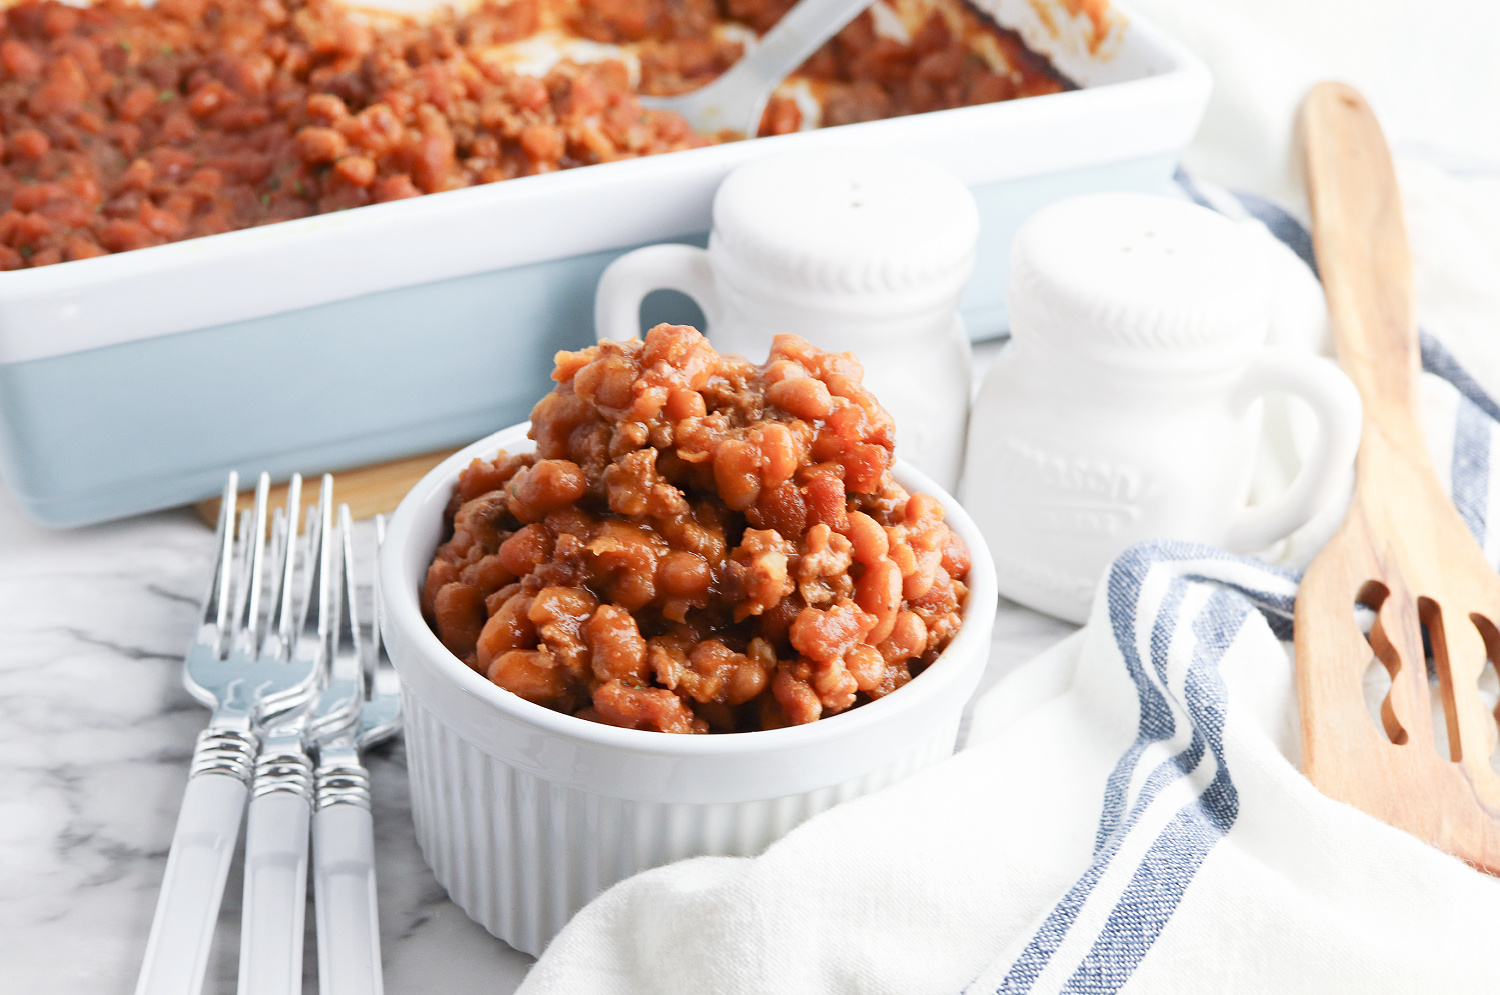 Baked Beans with ground beef